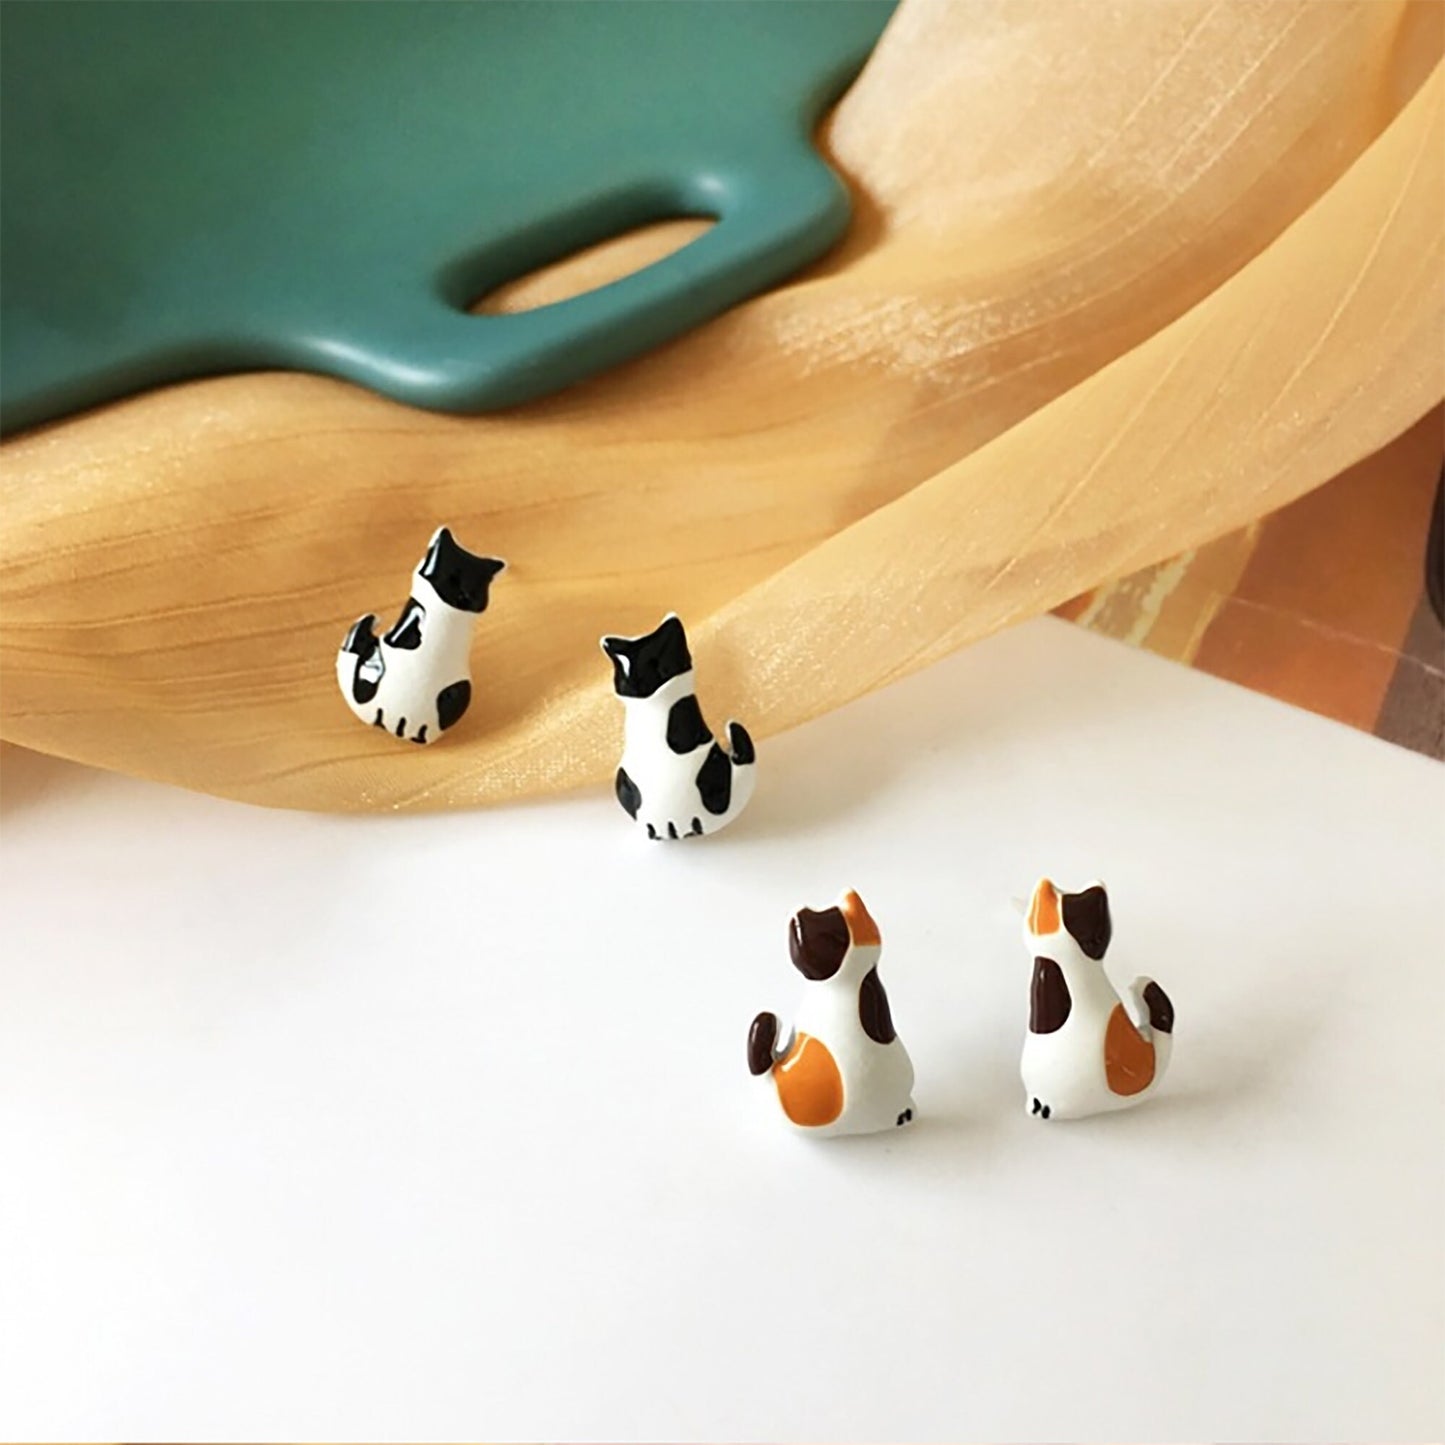 3D Painted Sitting Cats Kitty Black White Tortie Cat Stud Earrings  Tortoiseshell Cats Sterling Silver Posts